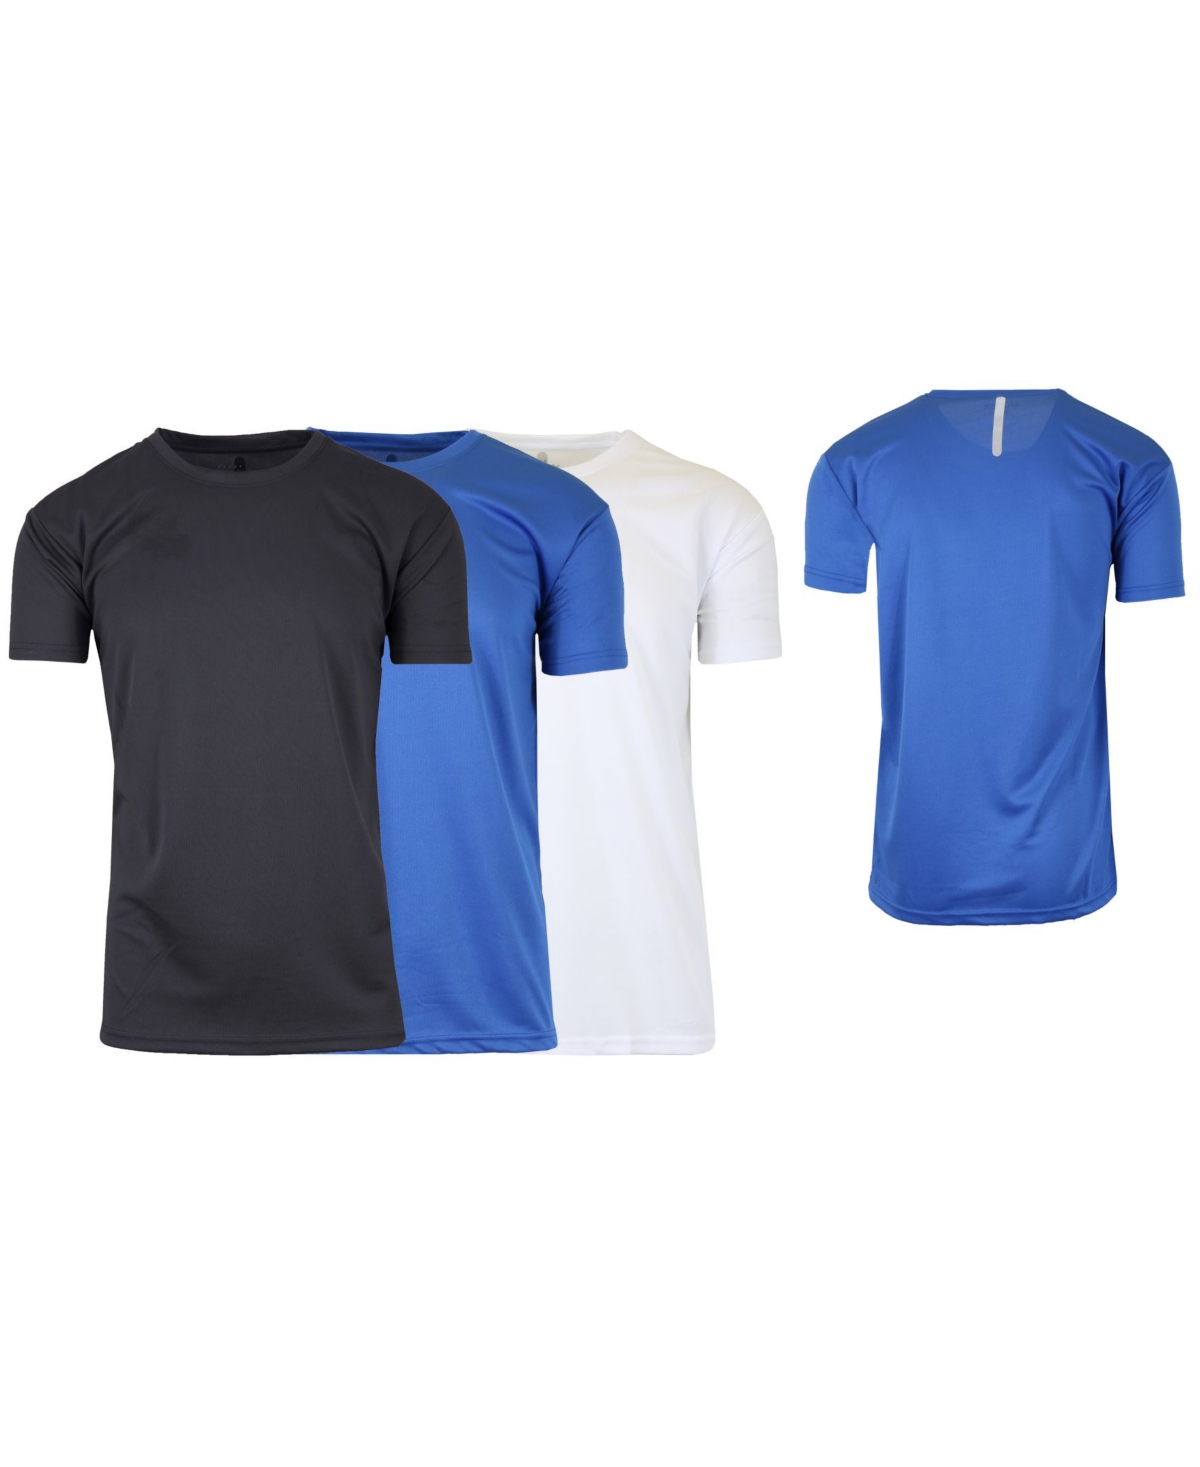 Galaxy By Harvic Men's Short Sleeve Moisture-wicking Quick Dry Performance Tee, Pack Of 3 In Black,medium Blue,white